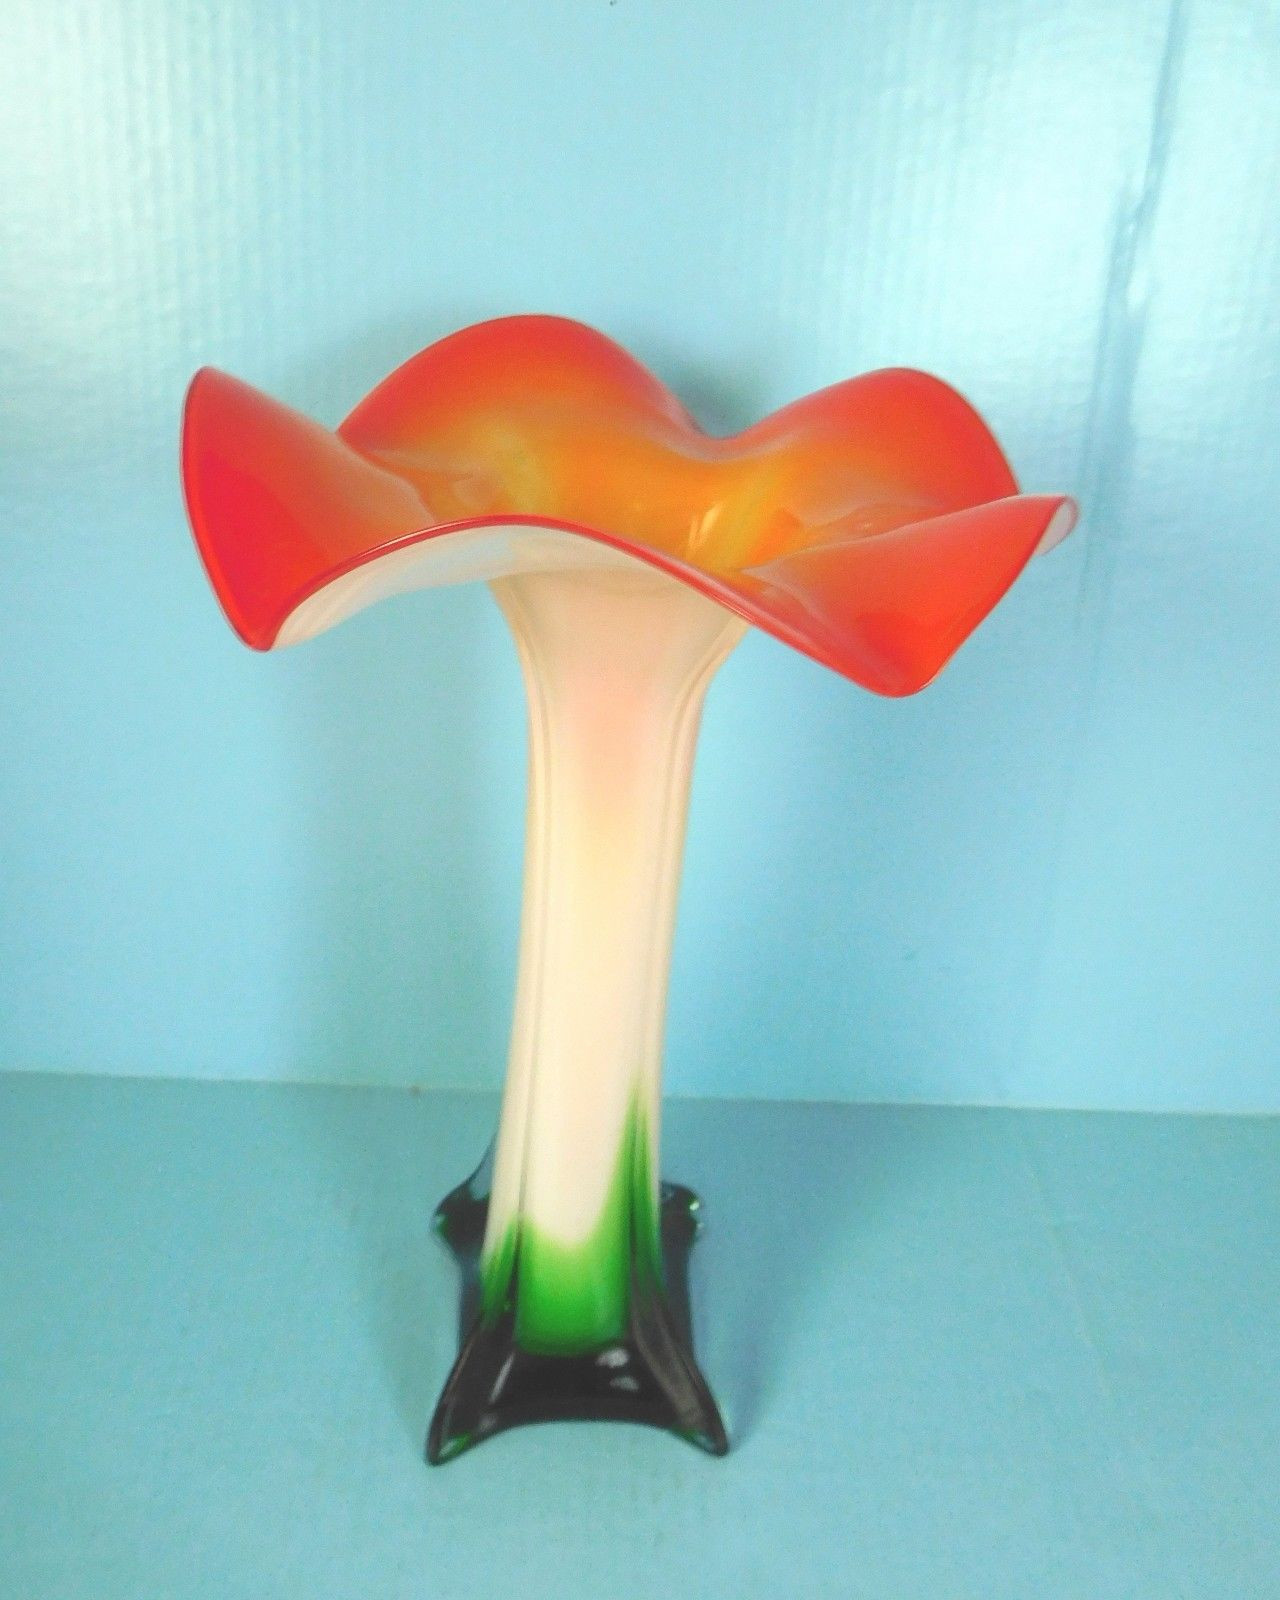 26 Nice Vintage Red Glass Bud Vase 2024 free download vintage red glass bud vase of flower petal retro art glass vase 14 25 tall poppy red green with regard to flower petal retro art glass vase 14 25 tall poppy red green 1 of 8 see more